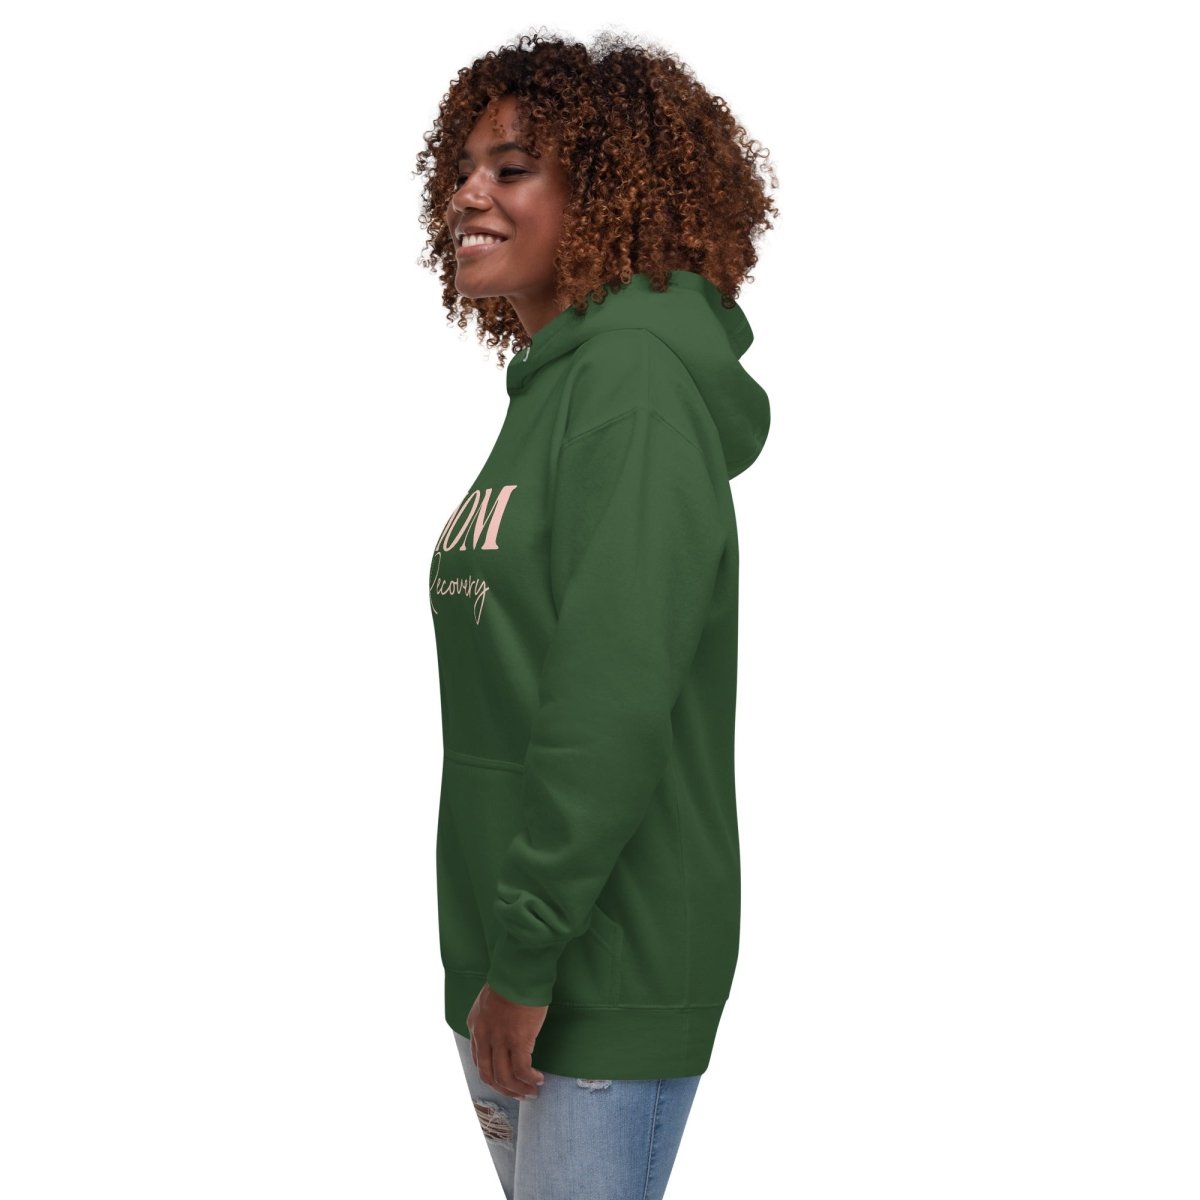 Mom's Recovery Hoodie - Clean & Sober